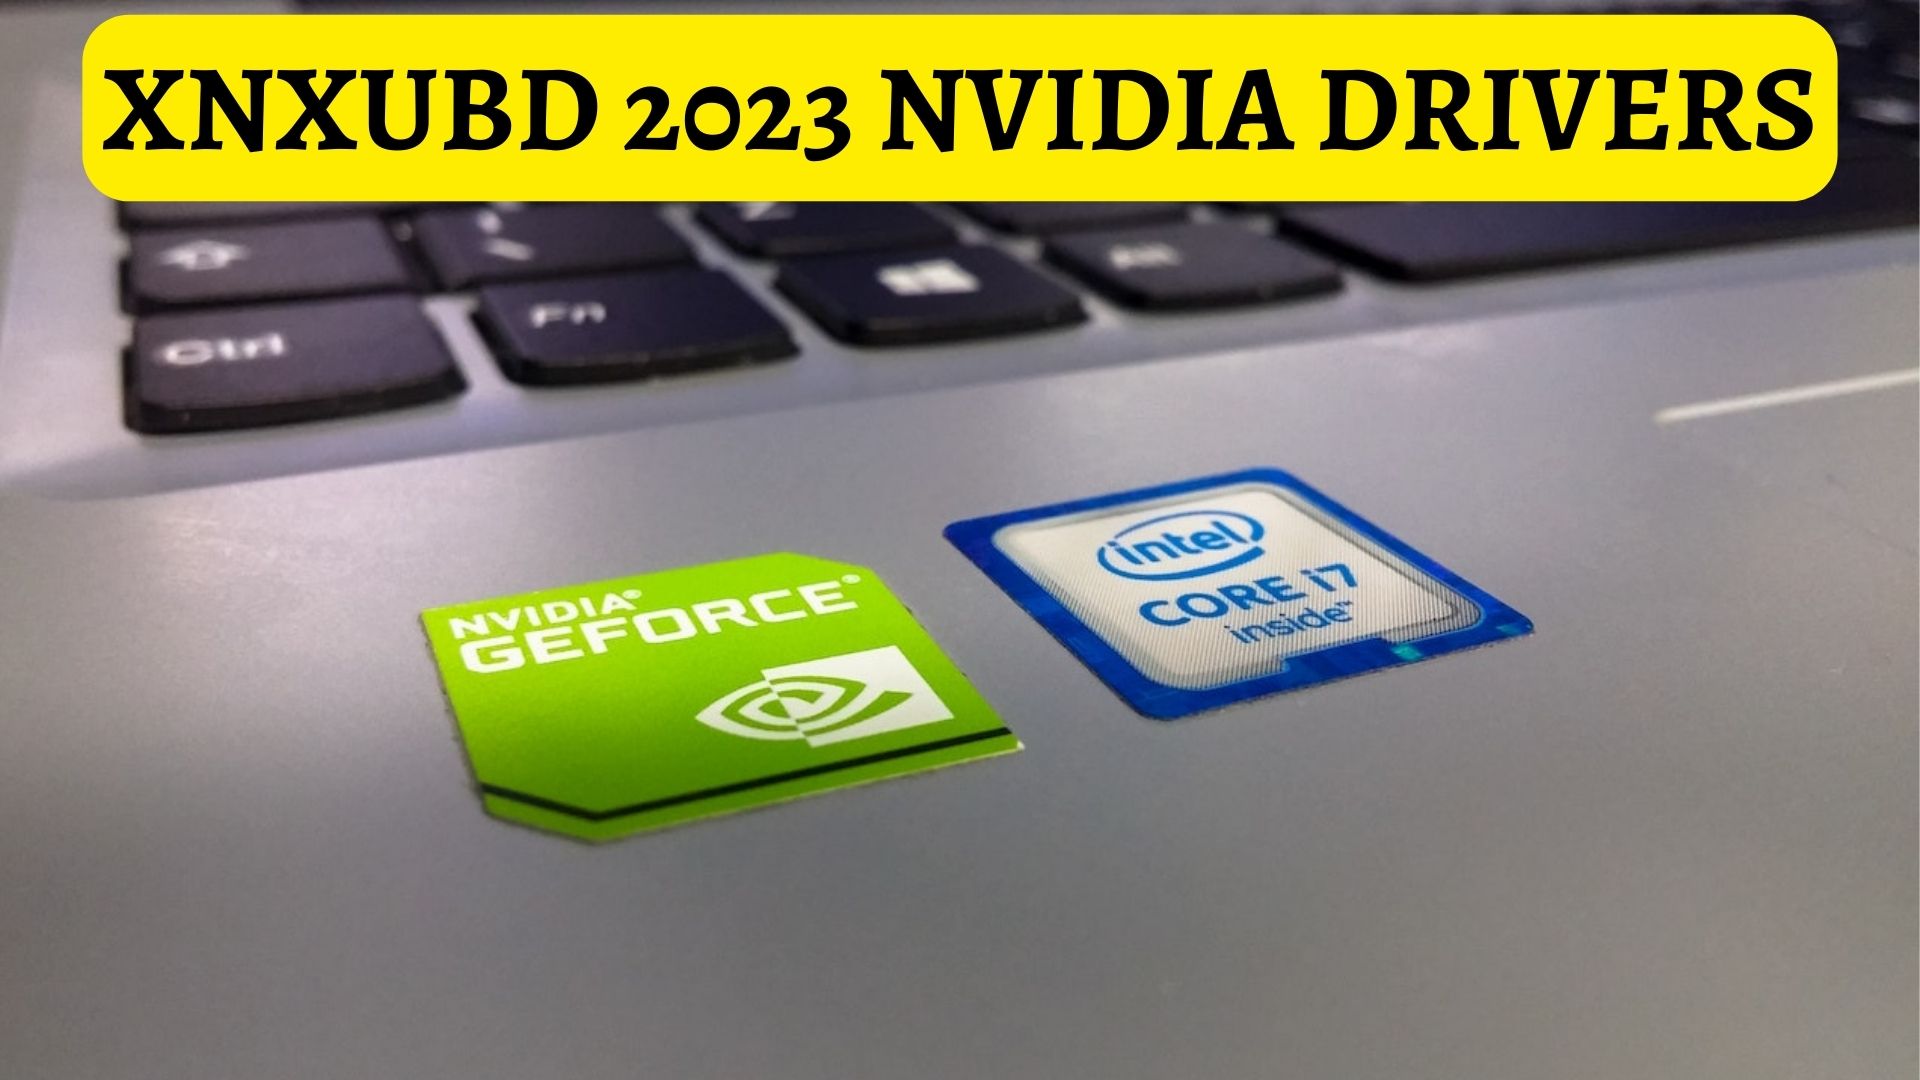 Xnxubd 2023 Nvidia Drivers - System Stability And Performance